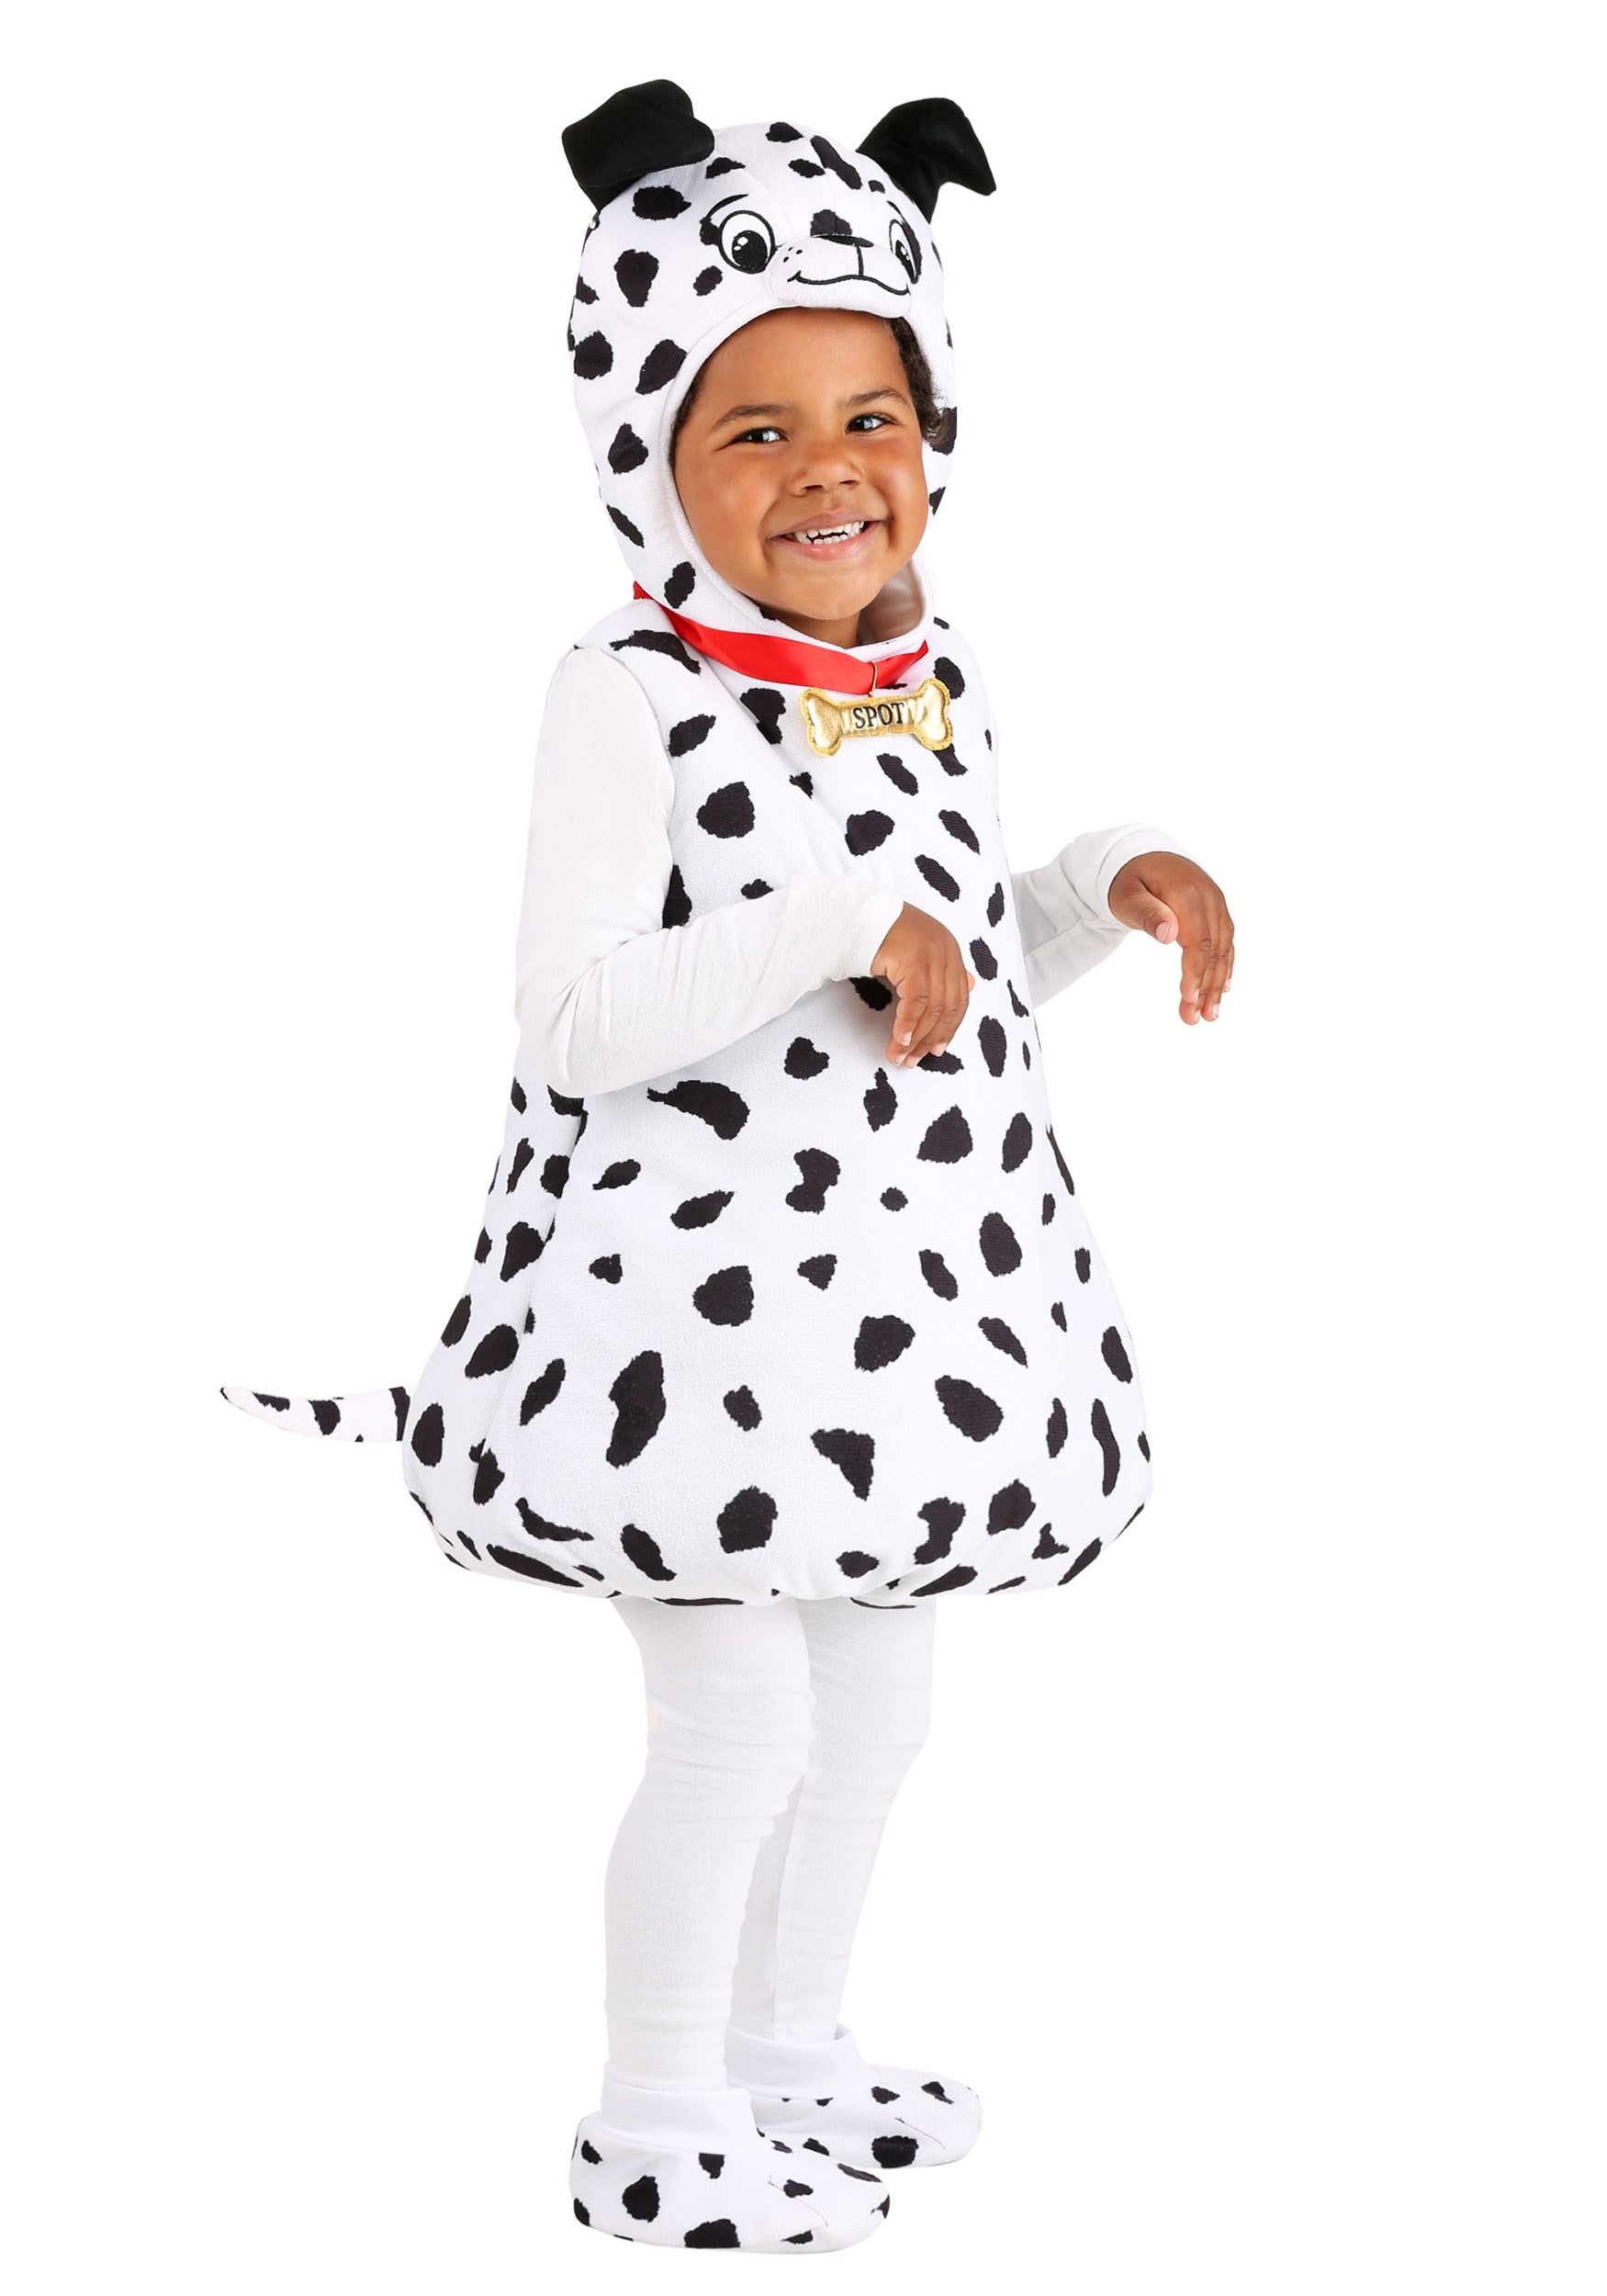 Photos - Fancy Dress Bubble FUN Costumes Dotty Dalmatian  Costume for Toddlers Black/White F 